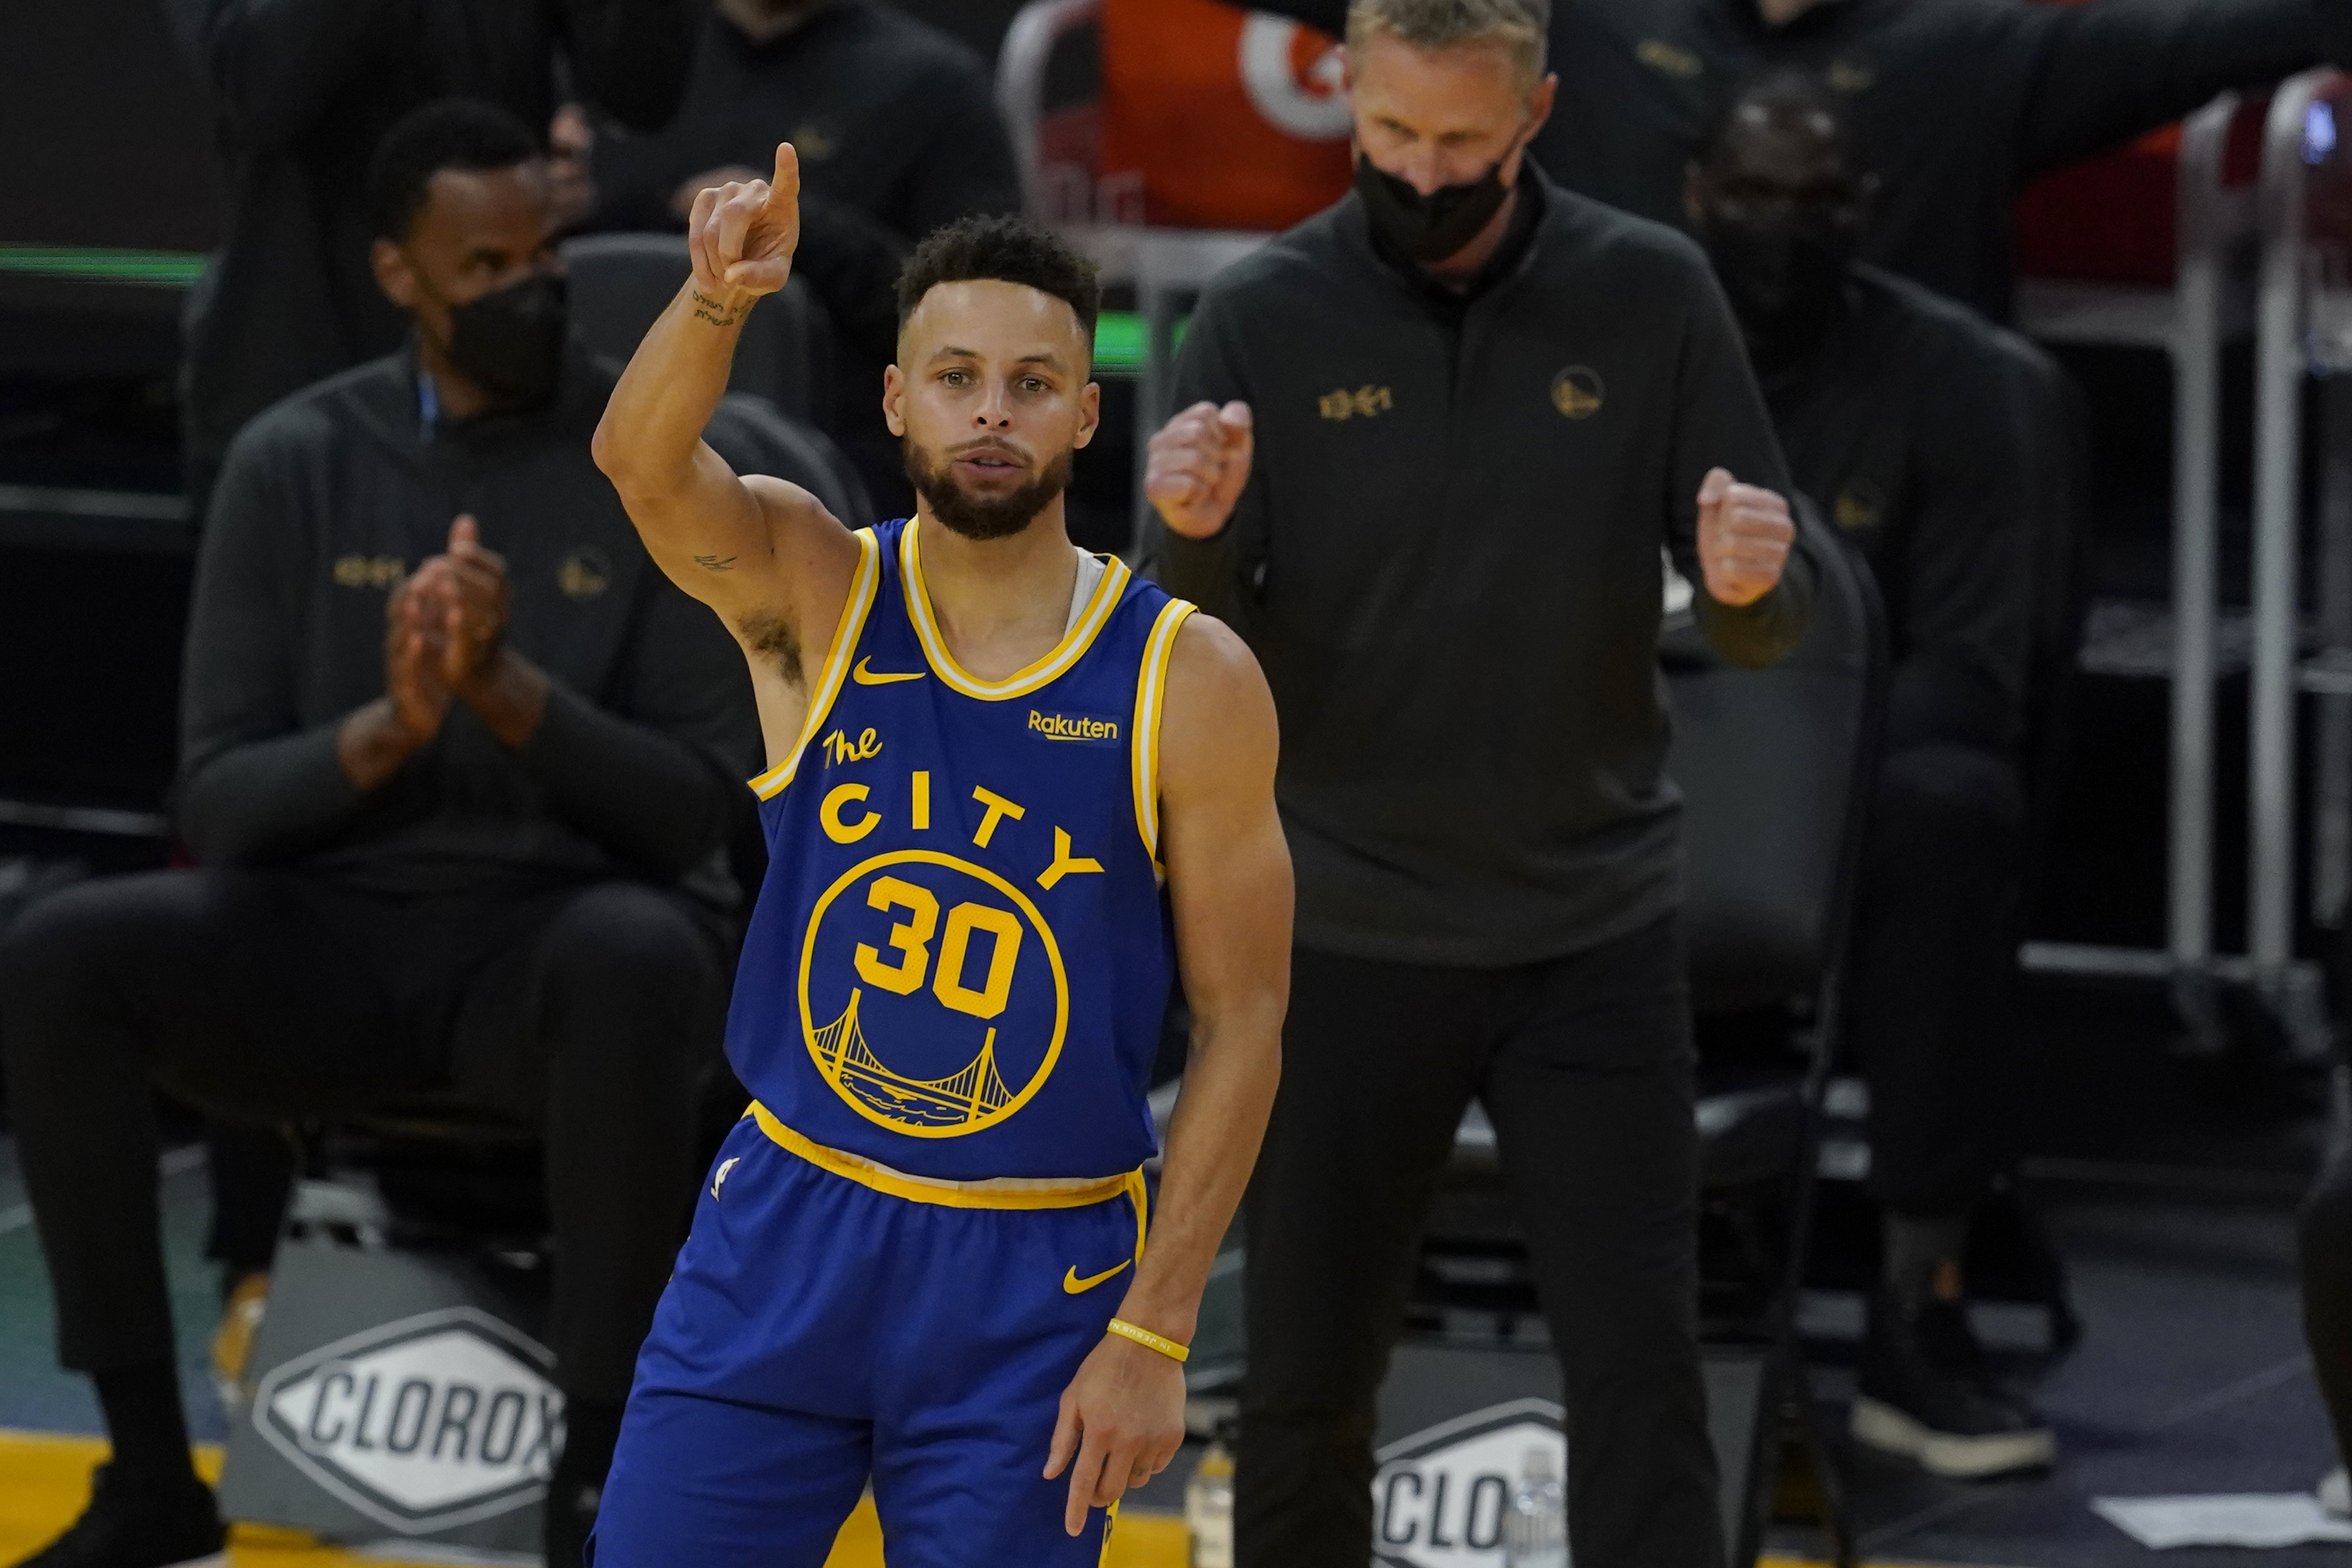 NBA 3-Point Contest 2021 Live stream, start time, TV channel, how to watch Curry, Tatum and more face off